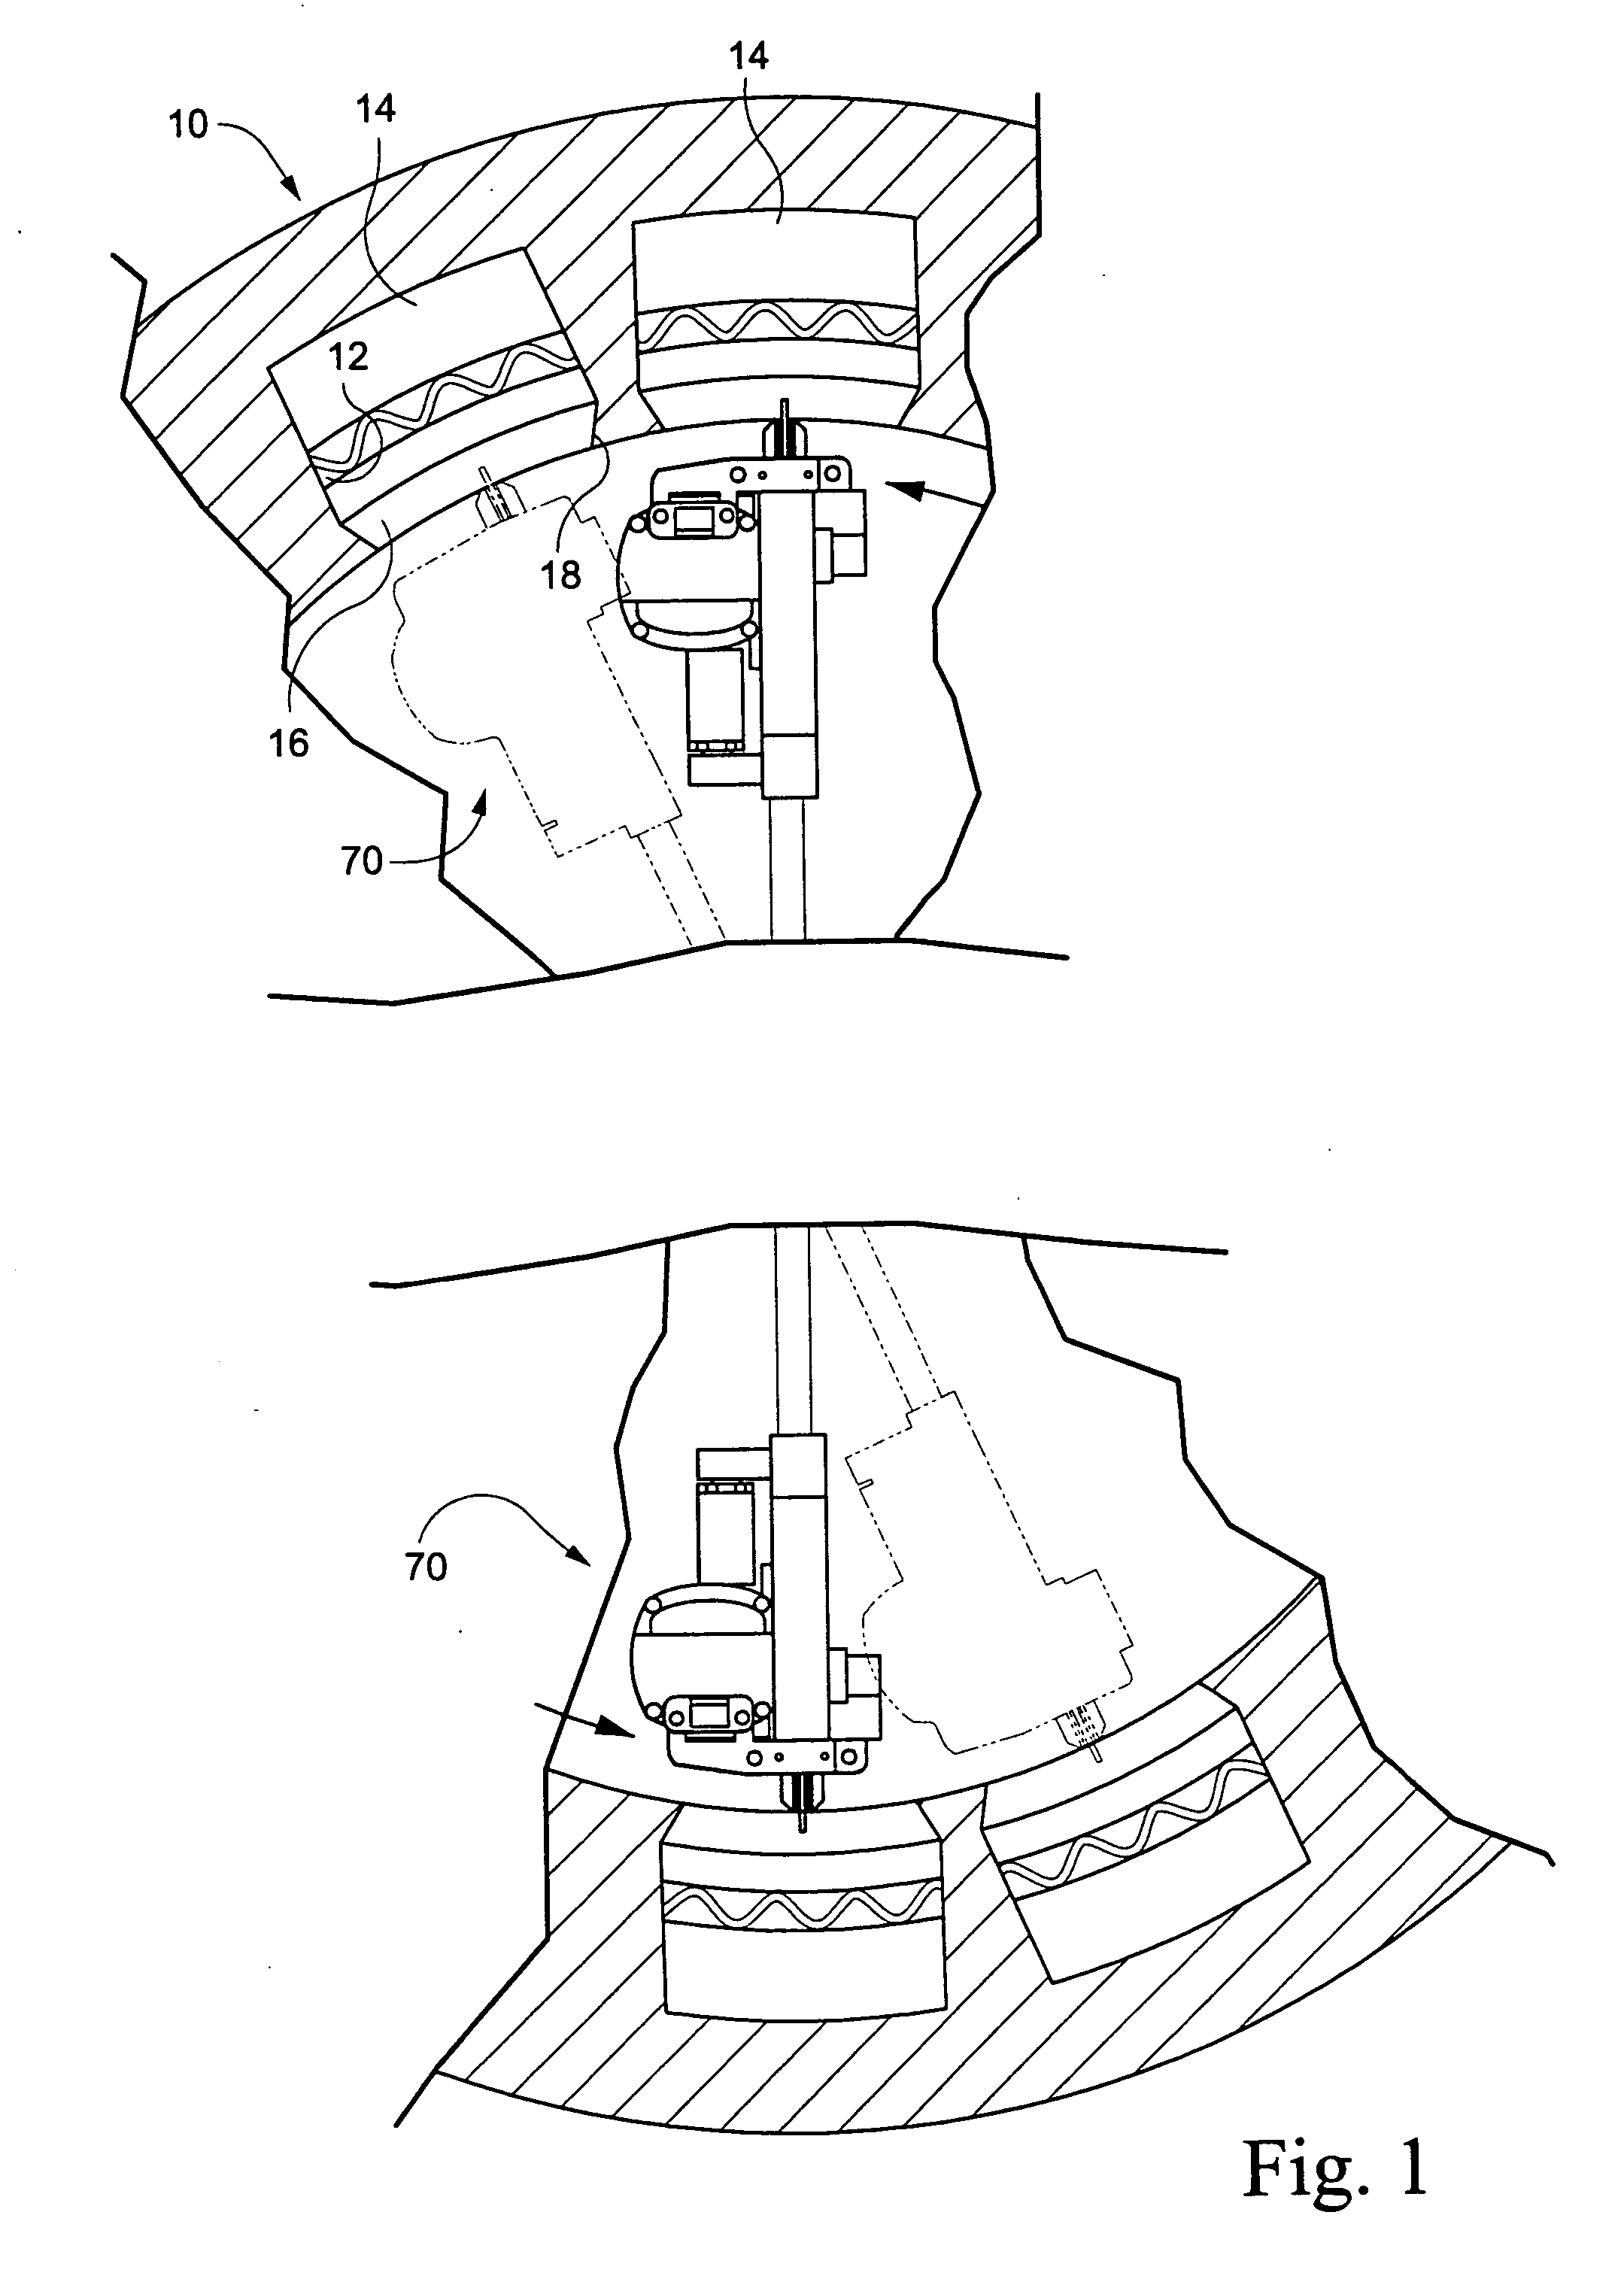 Apparatus and methods for removing wedges of a stator core of an electrical machine